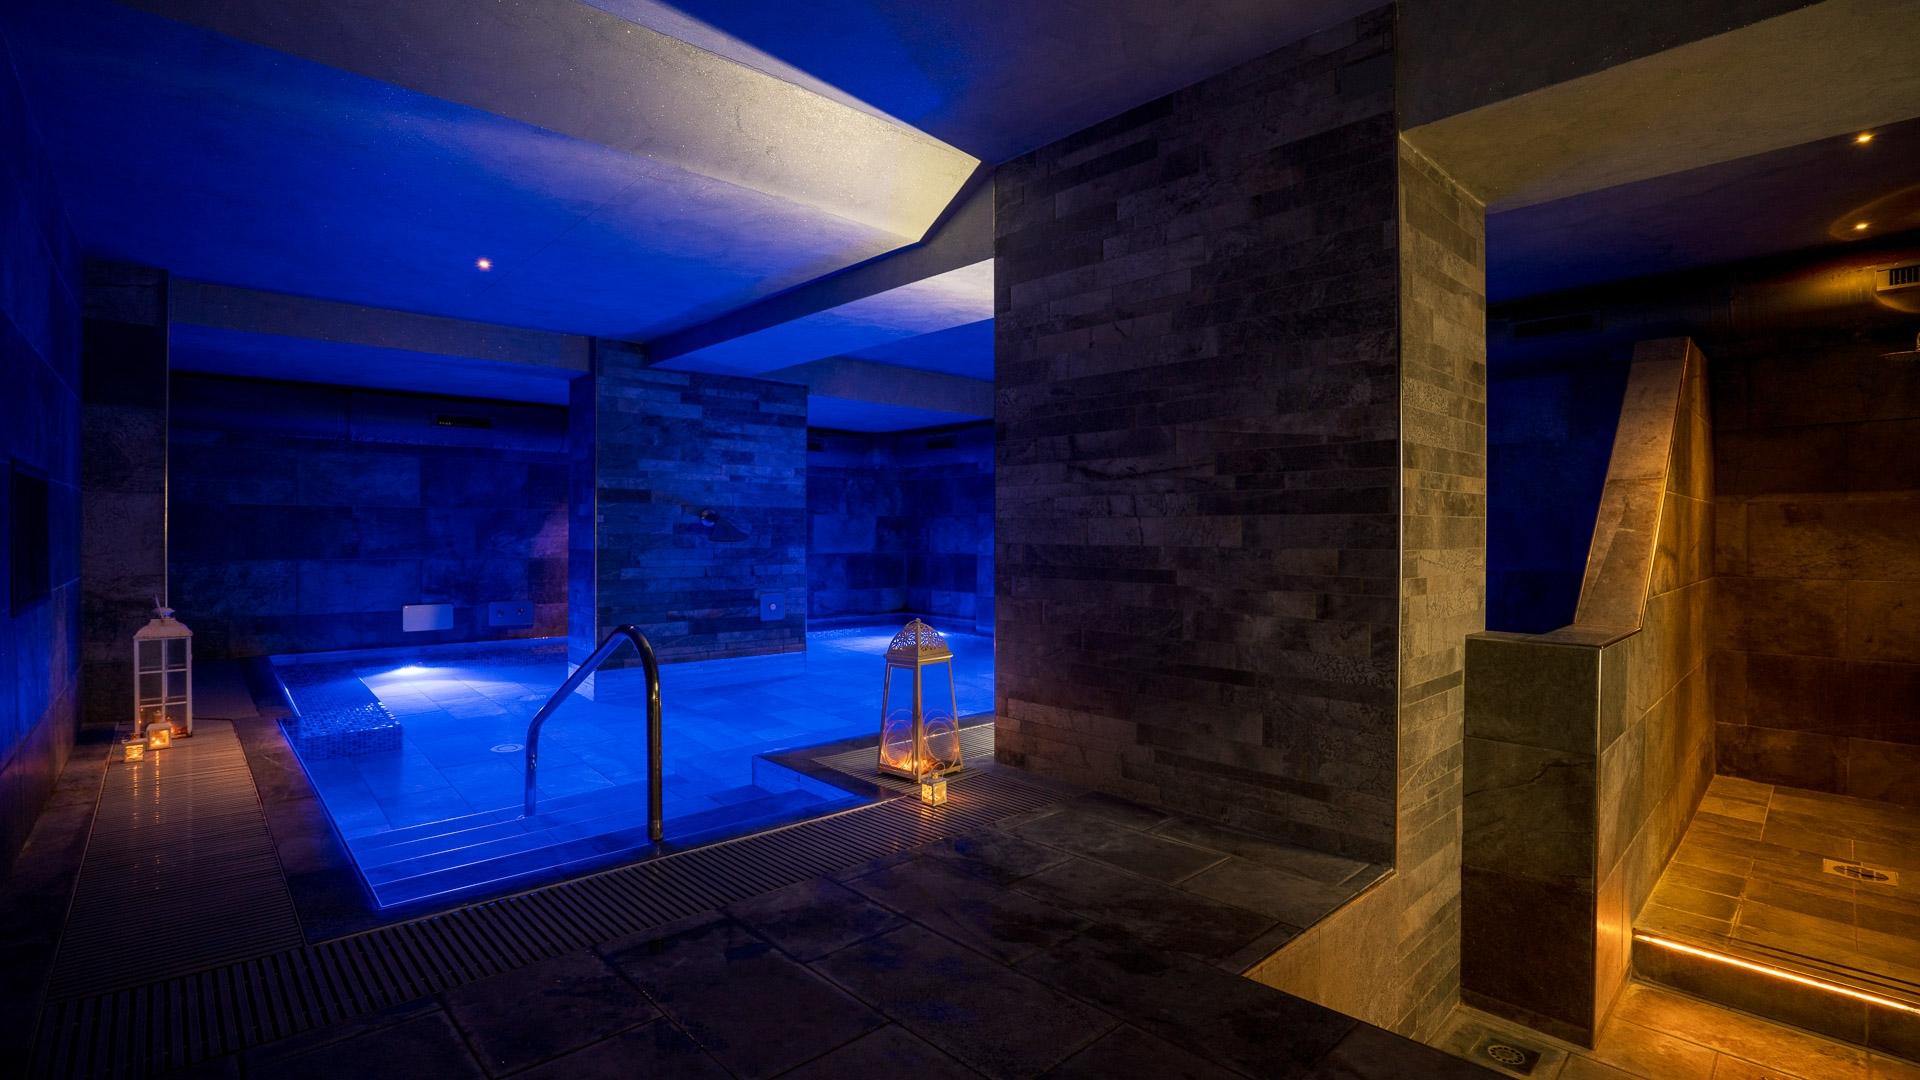 grand-hotel-terme-chianciano fr nouvel-an-hotel-4-etoiles-a-chianciano-offre-avec-massage 010